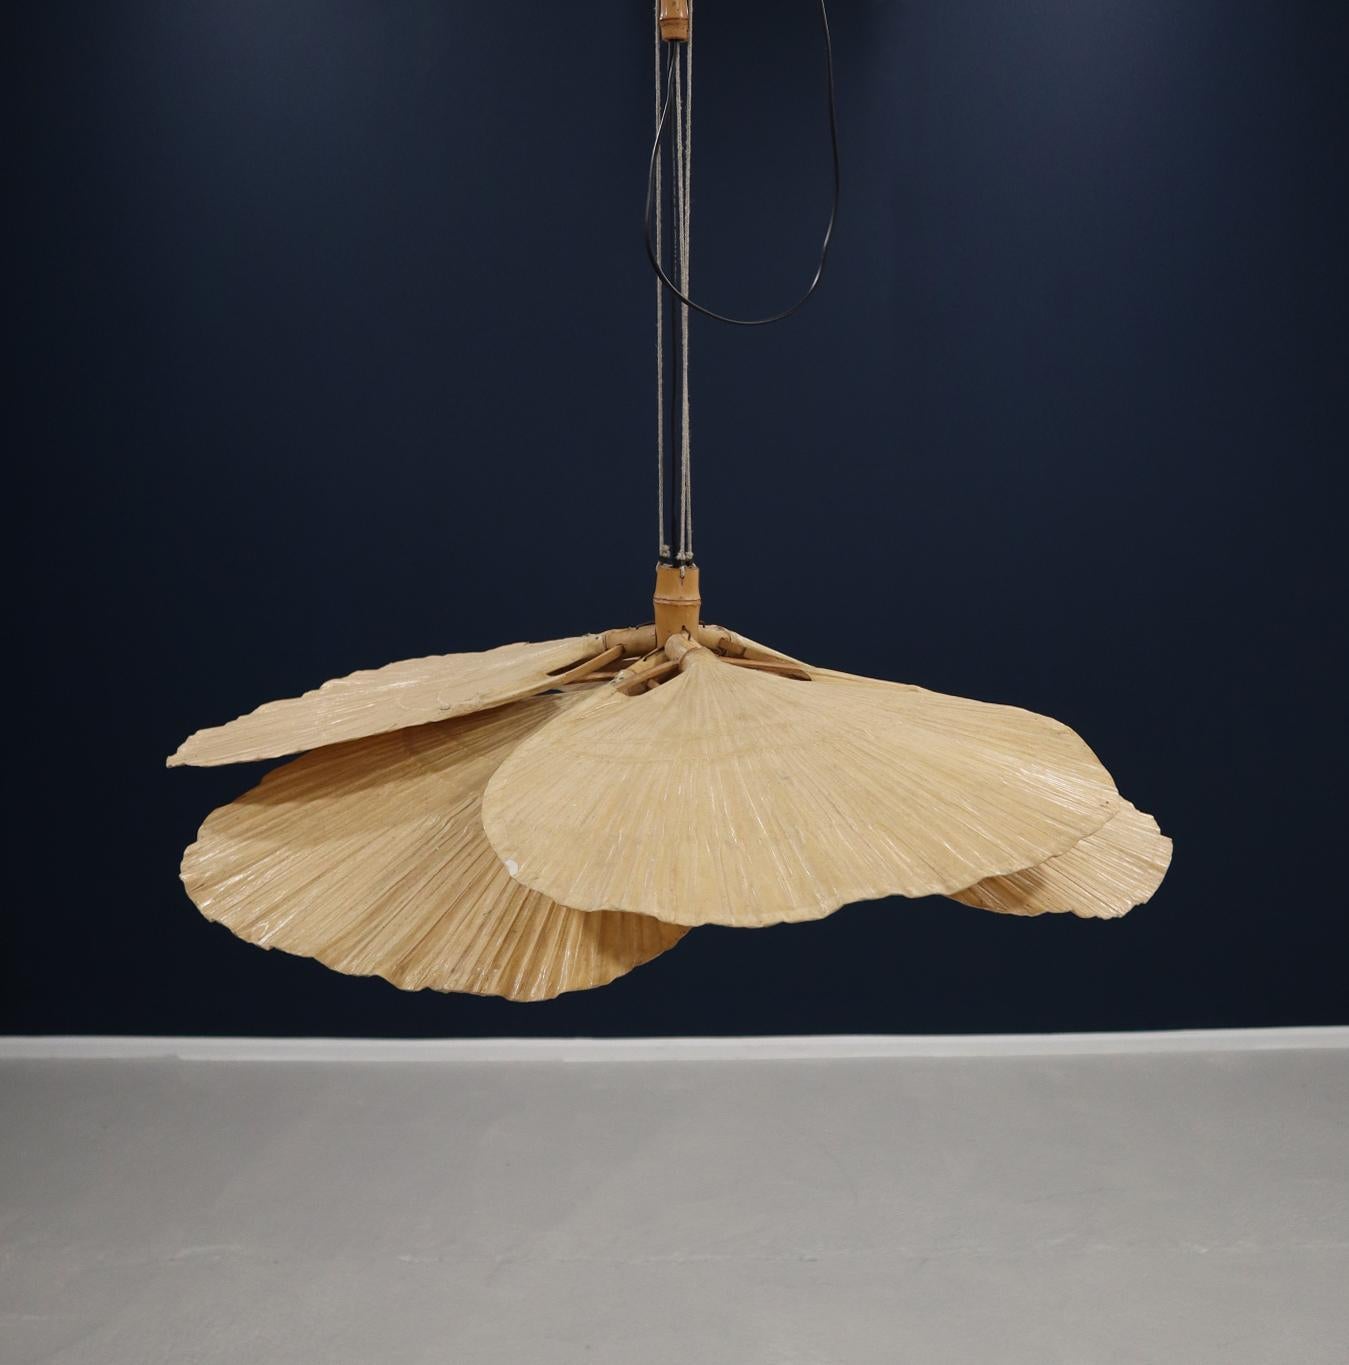 Ingo Maurer Uchiwa 'Hana' Lamp for M Design, Germany 1970s

A stunning and super rare lighting display of six large fans. The 'Hana’ chandelier come from Ingo Maurer’s interest in paper lampshades from Japan, made of bamboo and Japanese rice